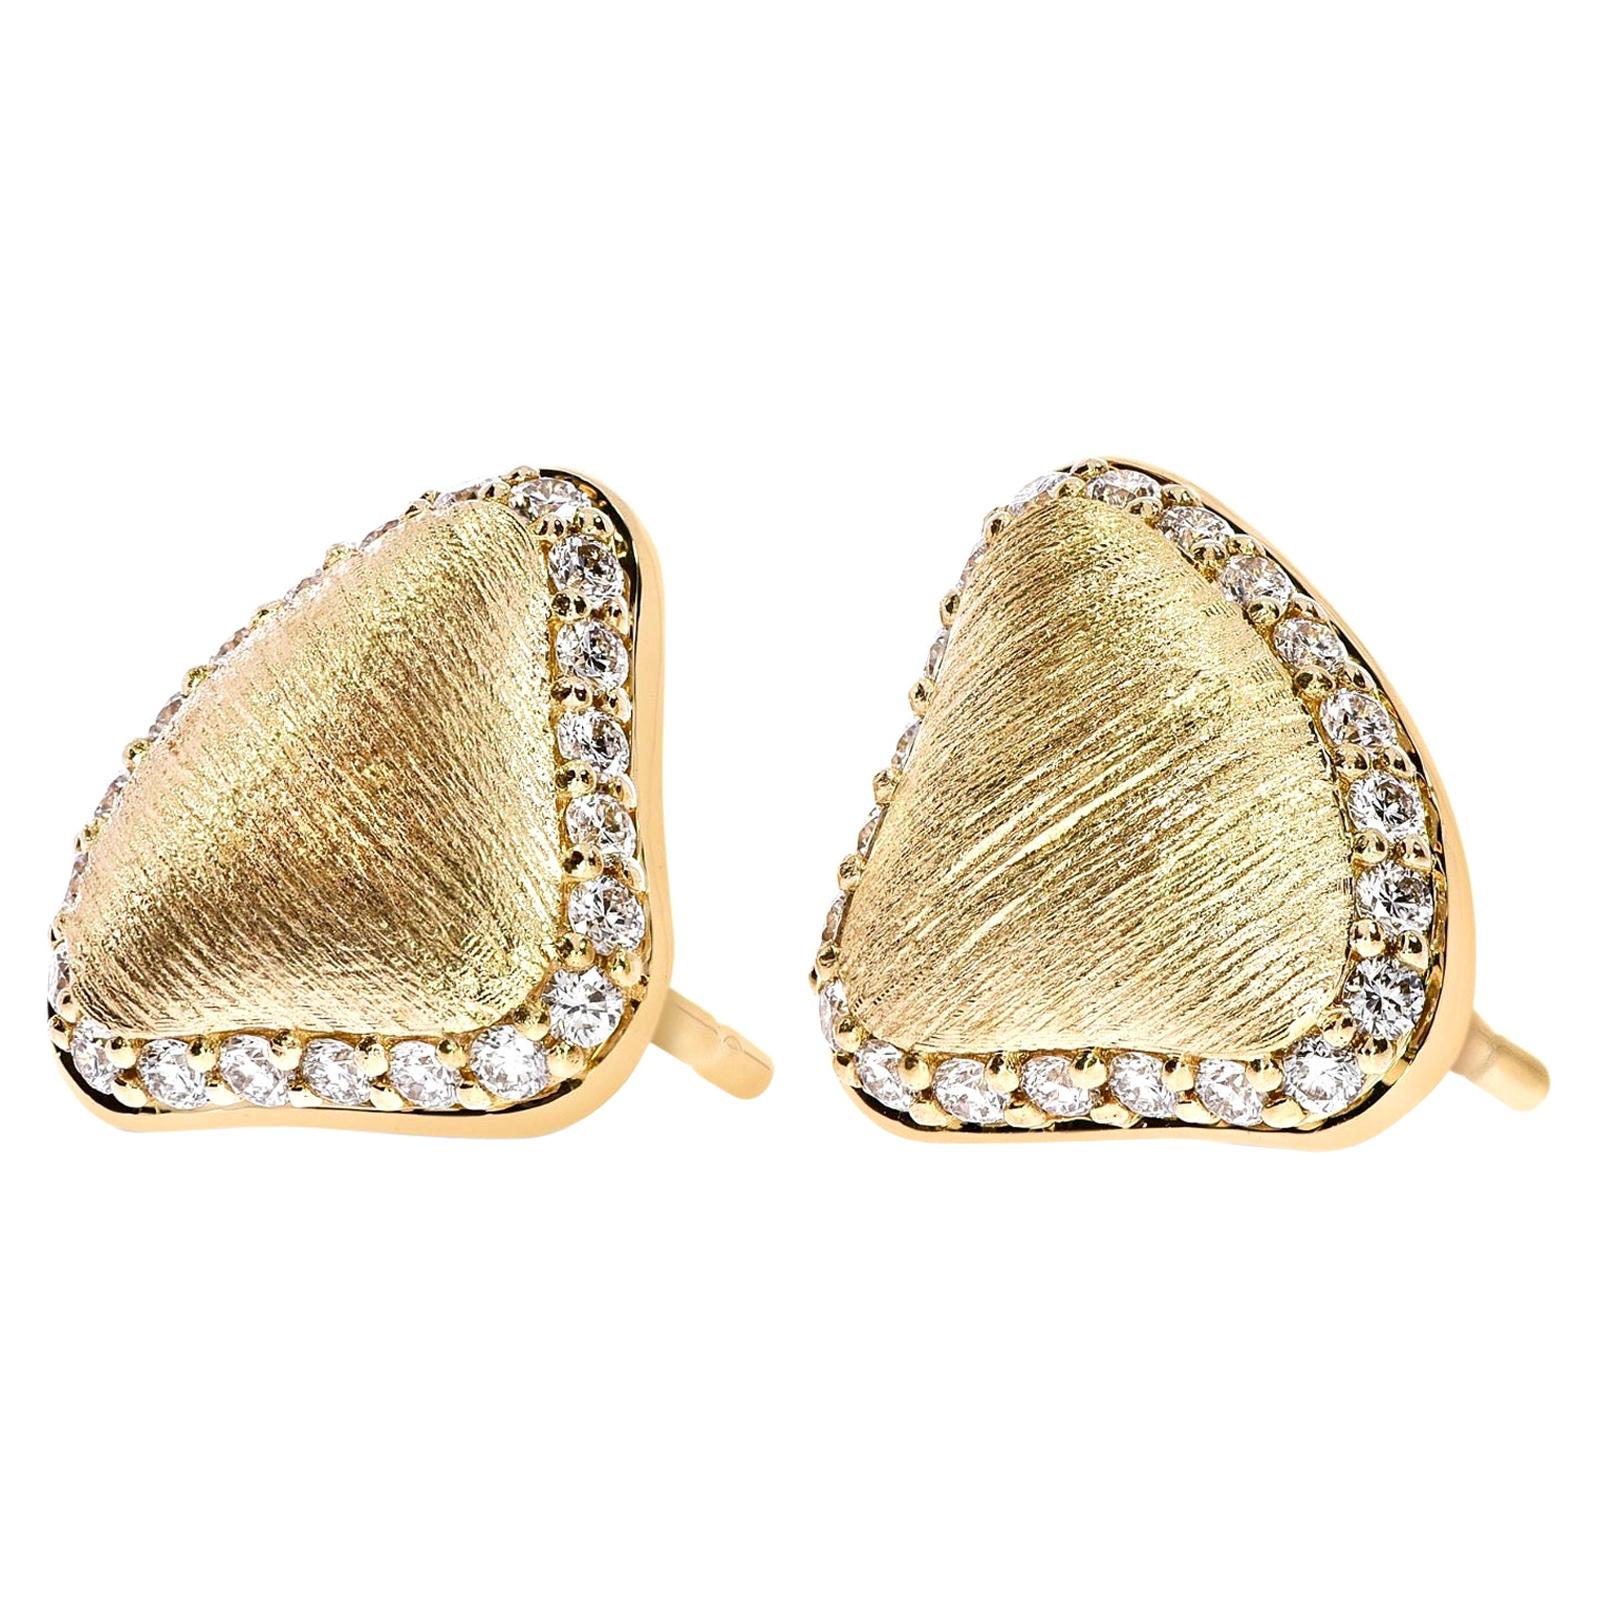 This pair of studs are hand textured to give you that brushed detail and it's shown here in 18K Rose gold and the edges are expertly lined with 0.40cts of G VS white brilliant cut diamonds. The stoppers are set in an easy wear cap.